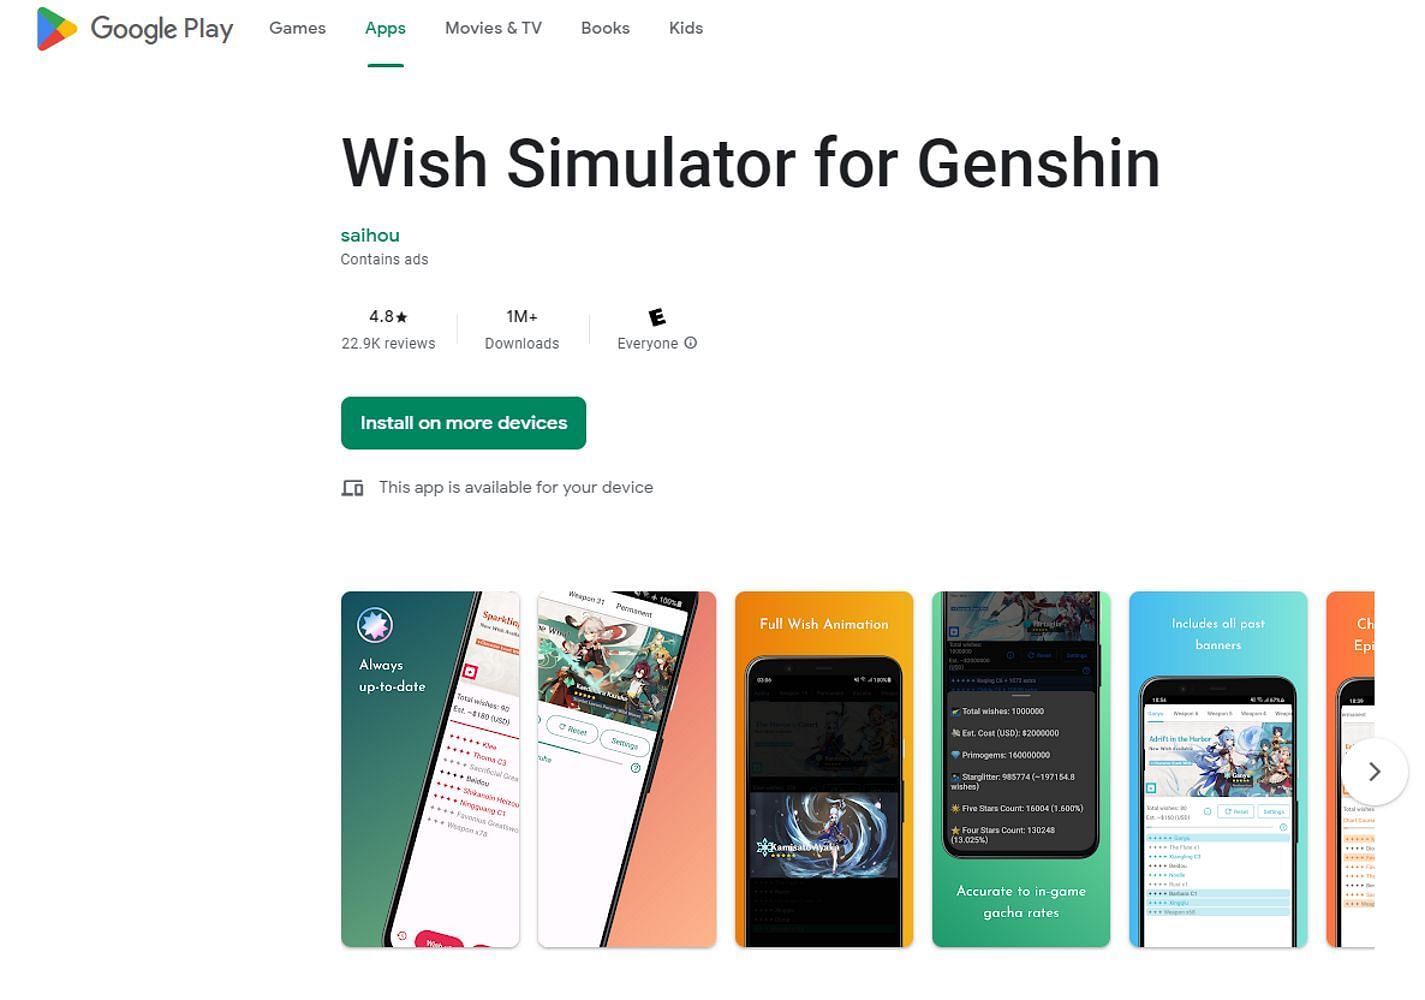 An example of a popular wish simulator on Android devices (Image via Google Play)